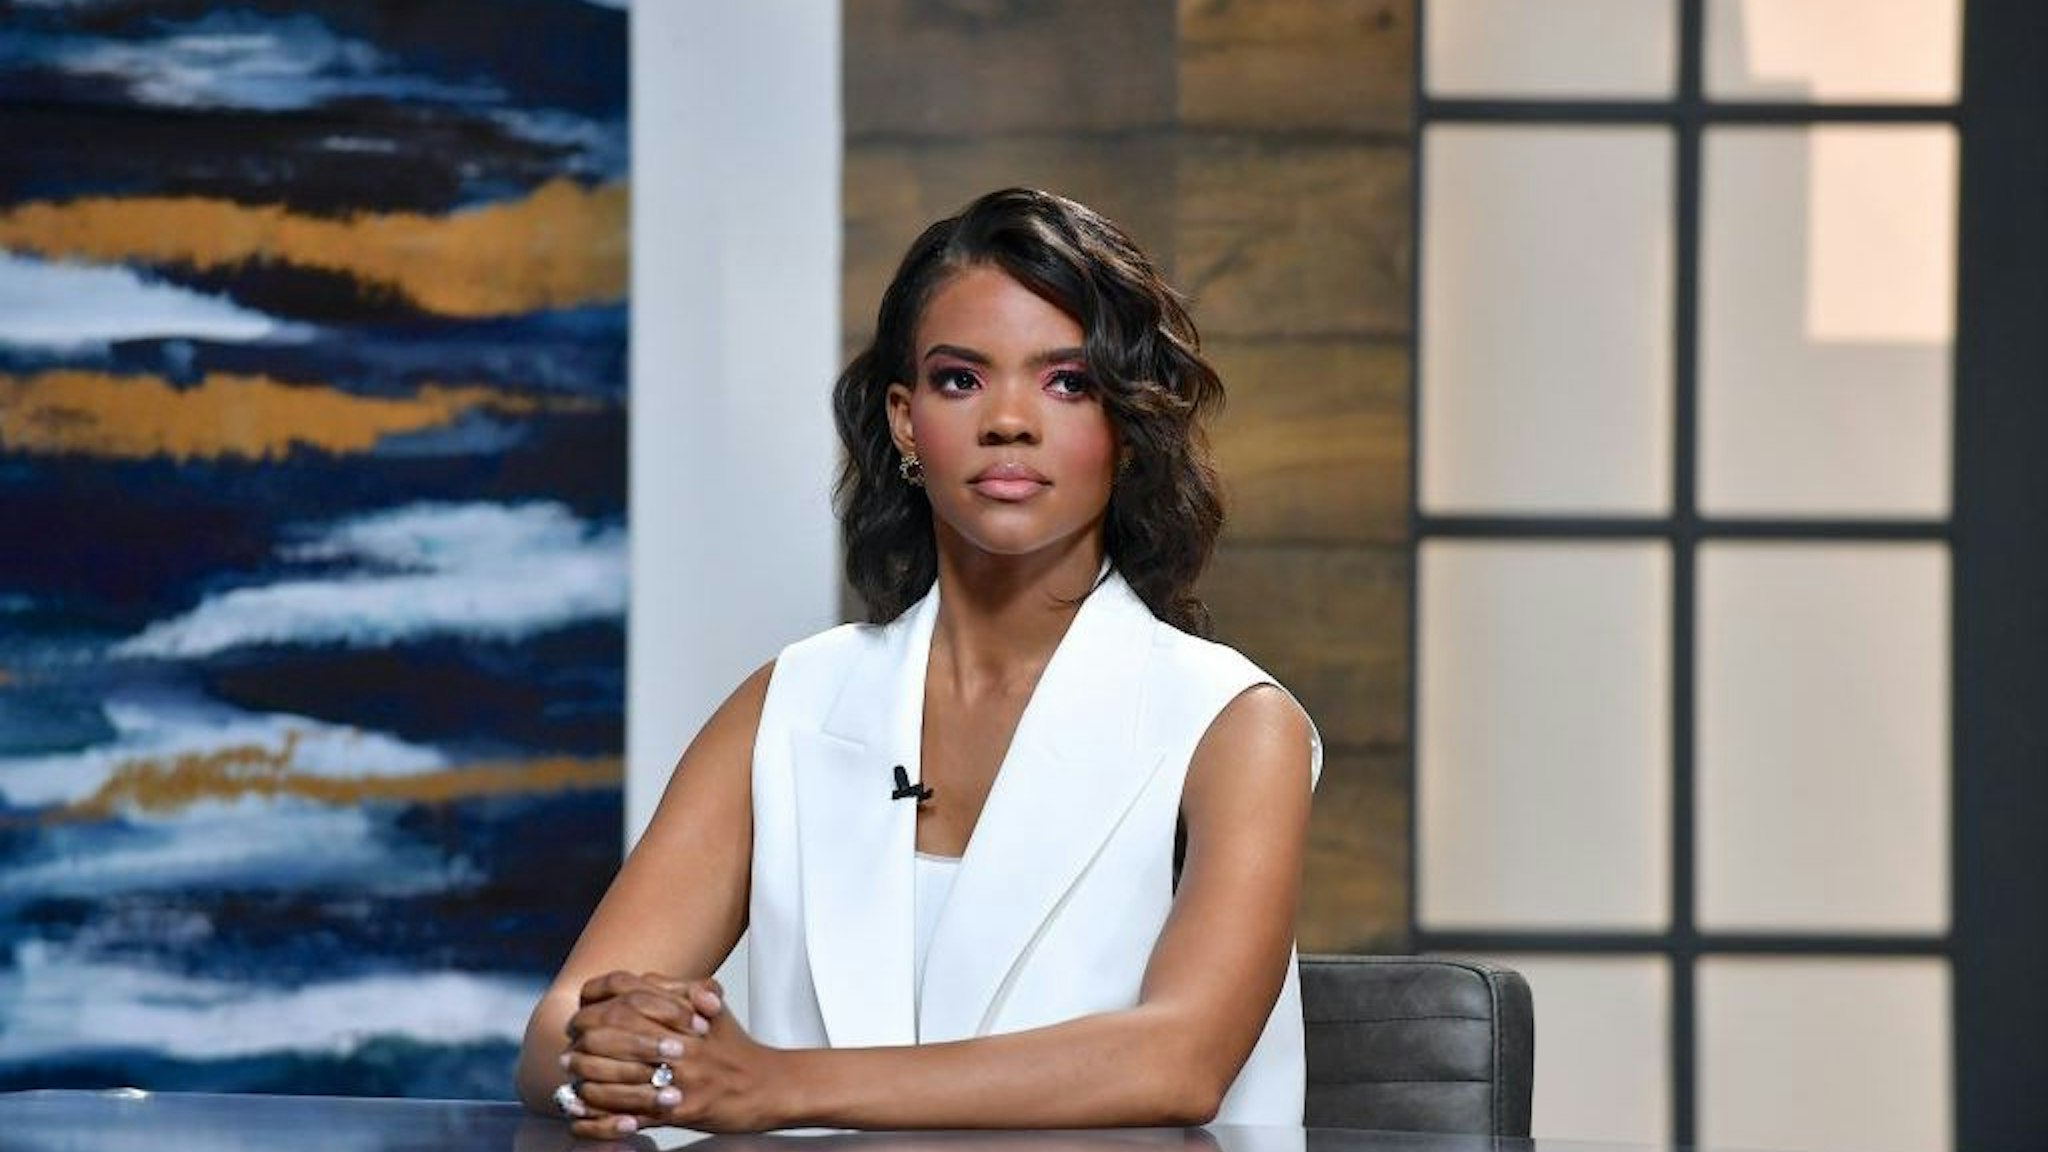 NASHVILLE, TENNESSEE - JUNE 25: Candace Owens is seen on set of "Candace" on June 25, 2021 in Nashville, Tennessee. The show will air on Tuesday, July 6, 2021. (Photo by Jason Davis/Getty Images)